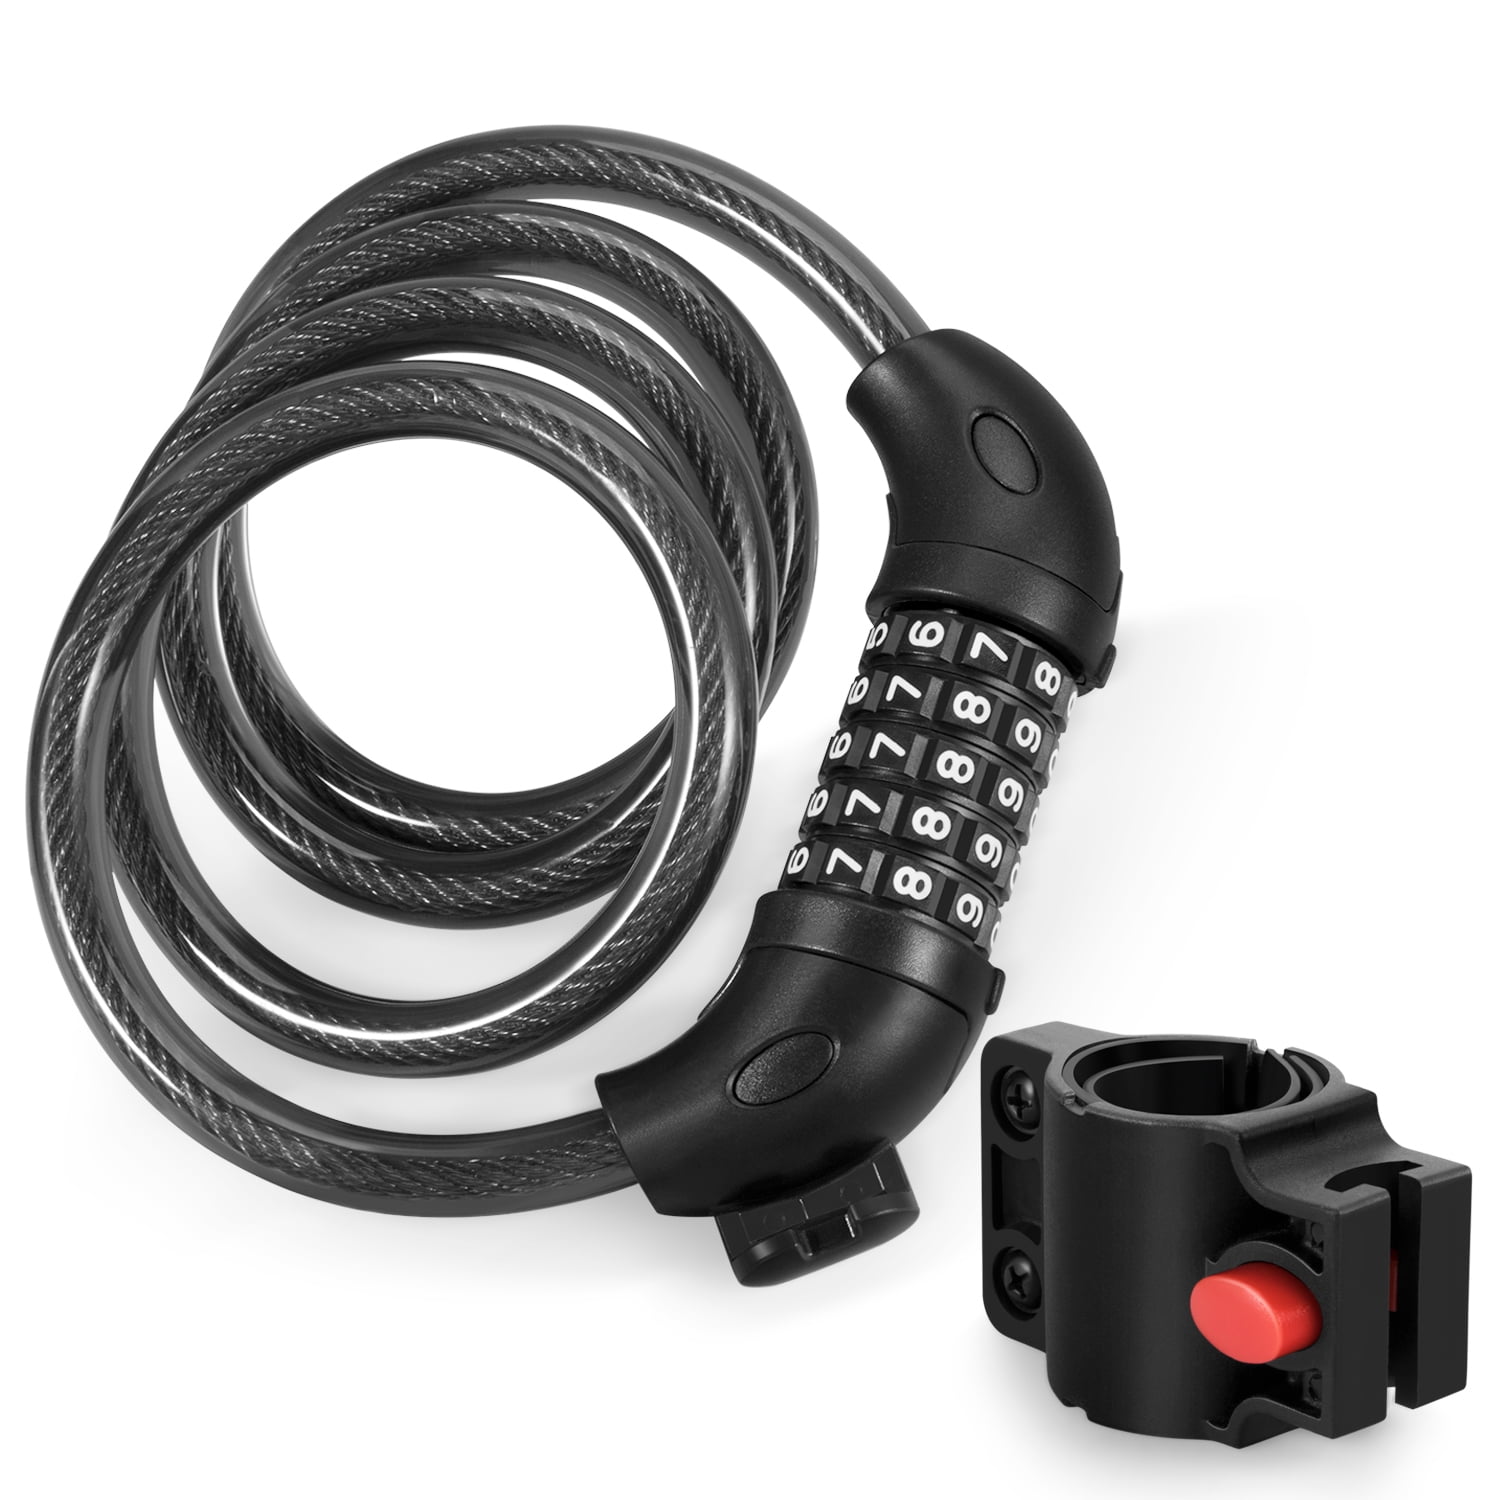 4ft Heavy Duty Security 5 Digit Combination Bike Cable Lock w/ Mounting Bracket